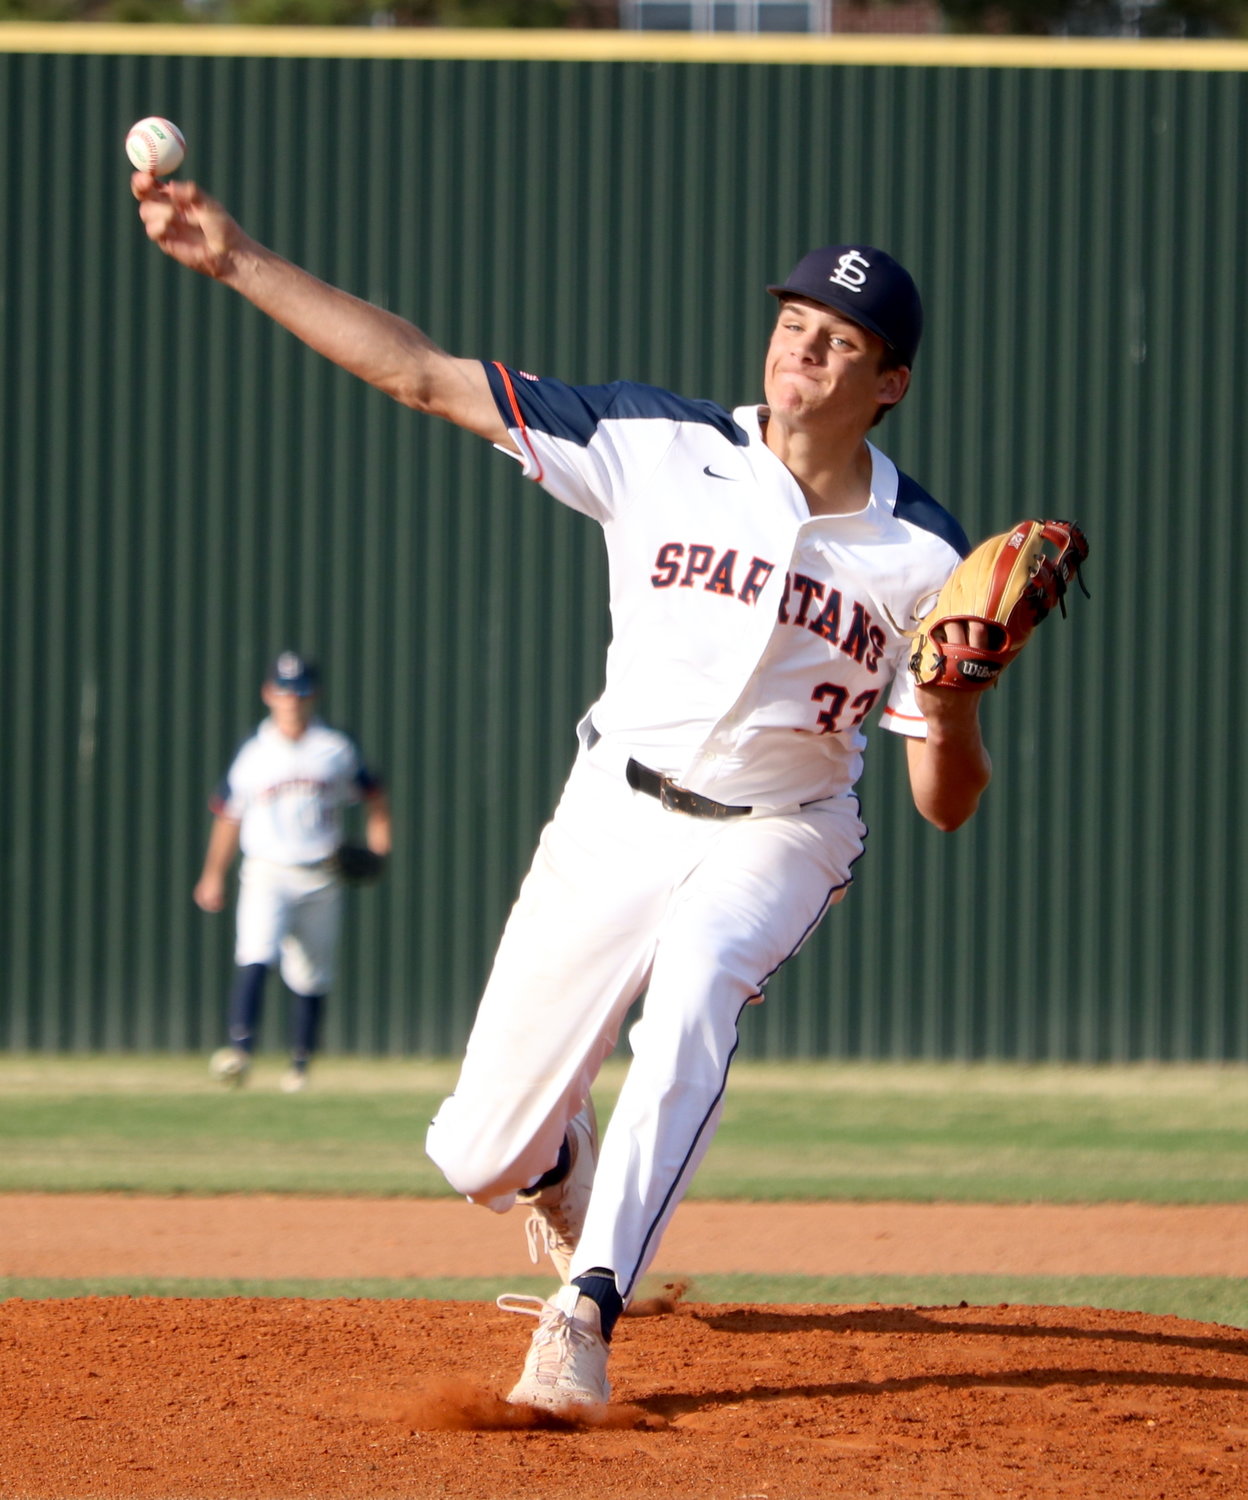 Nathan Johnson pitches during Friday’s District 19-6A  game between Seven Lakes and Cinco Ranch at the Seven Lakes baseball field.